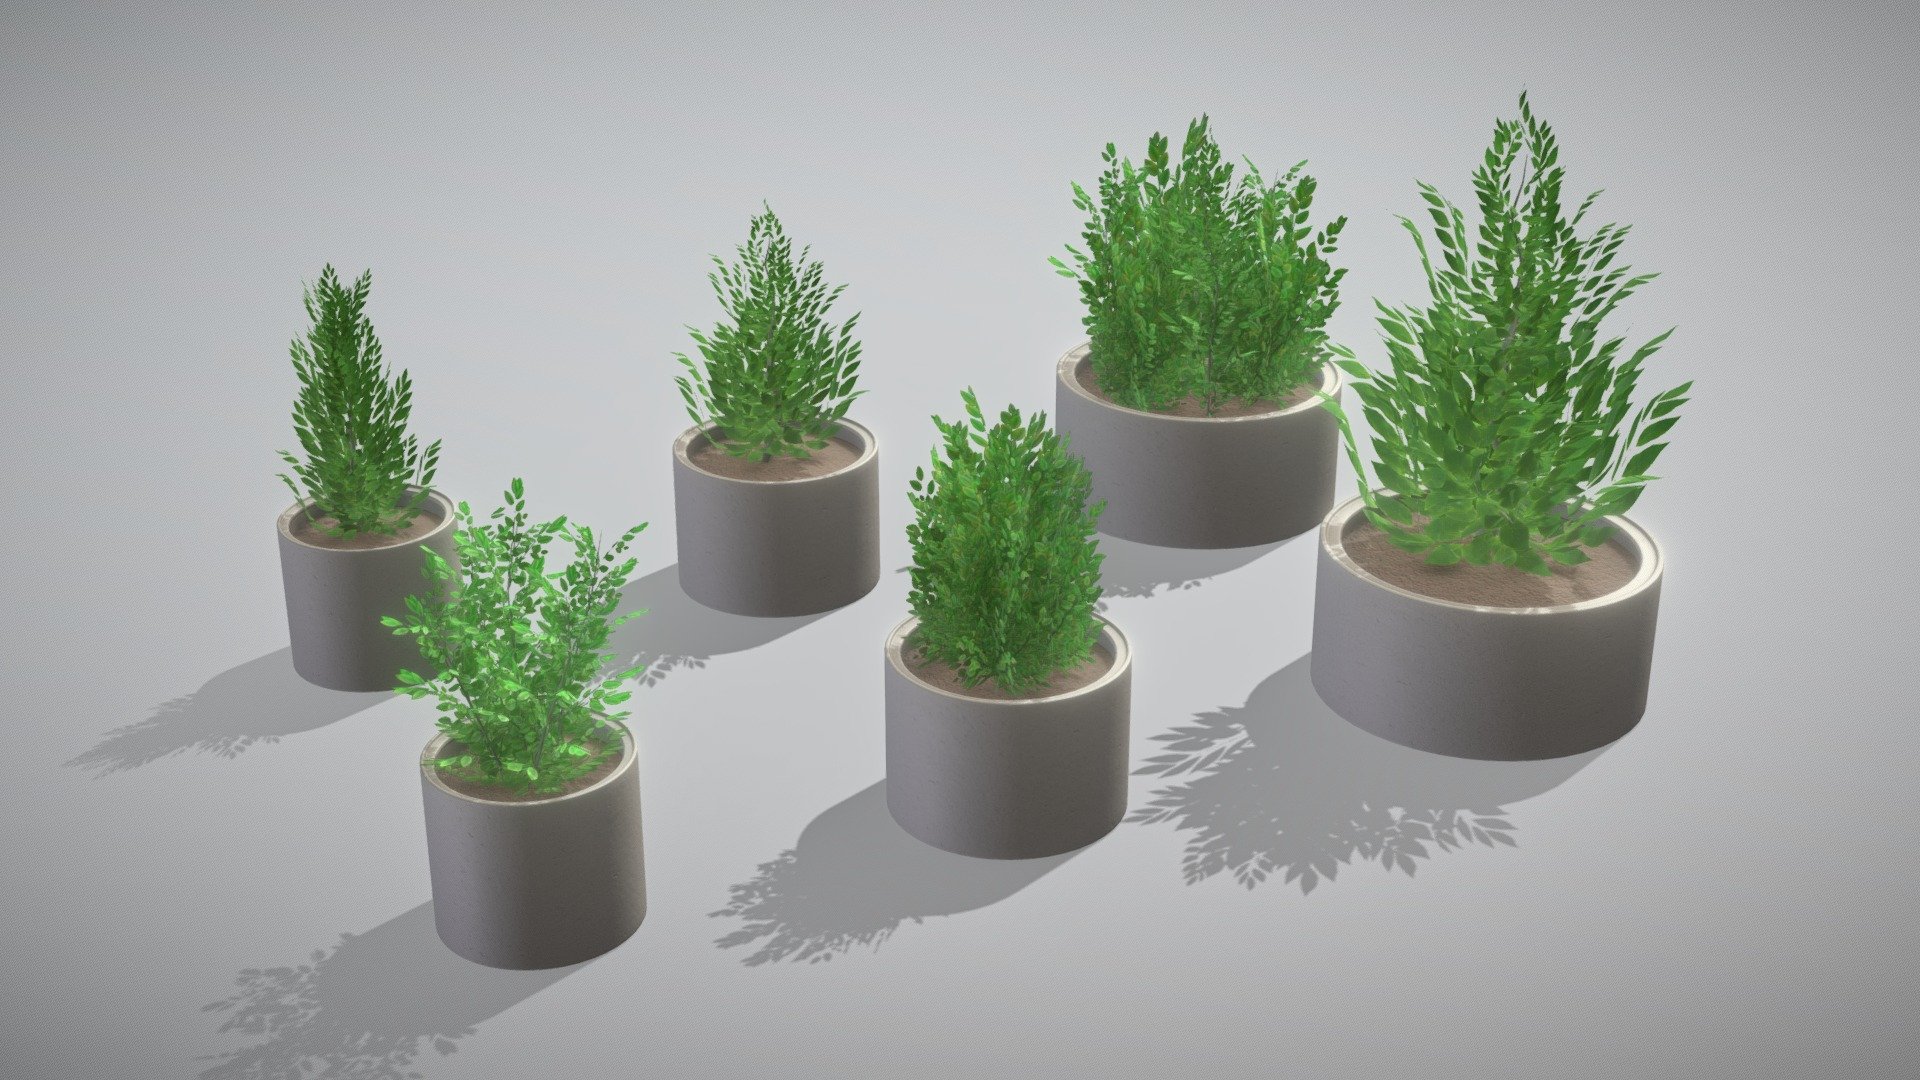 Here are some concrete pipe pots with bushes, version 2 without grass.

Parts:

Object Name - Concrete_pot_800mm_Bush_1-2 
Dimensions -  0.976m x 0.950m x 1.906m
Vertices = 1870
Polygons = 2256



Object Name - Concrete_pot_800mm_Bush_2-2 
Dimensions -  1.075m x 1.132m x 1.765m
Vertices = 2922
Polygons = 2770



Object Name - Concrete_pot_1000mm_Bush_1-2 
Dimensions -  1.290m x 1.245m x 2.013m
Vertices = 2173
Polygons = 2506



Object Name - Concrete_pot_1000mm_Bush_2-2 
Dimensions -  1.001m x 1.001m x 1.862m
Vertices = 1385
Polygons = 1946



Object Name - Concrete_pot_1500mm_Bush_1-2 
Dimensions -  1.524m x 1.503m x 2.115m
Vertices = 4017
Polygons = 4066



Object Name - Concrete_pot_1500mm_Bush_2-2 
Dimensions -  1.966m x 2.029m x 2.849m
Vertices = 2173
Polygons = 2506


Modeled and textured by 3DHaupt in Blender-2.91 - Concrete Pipe Pots with Bushes 2 - Buy Royalty Free 3D model by VIS-All-3D (@VIS-All) 3d model